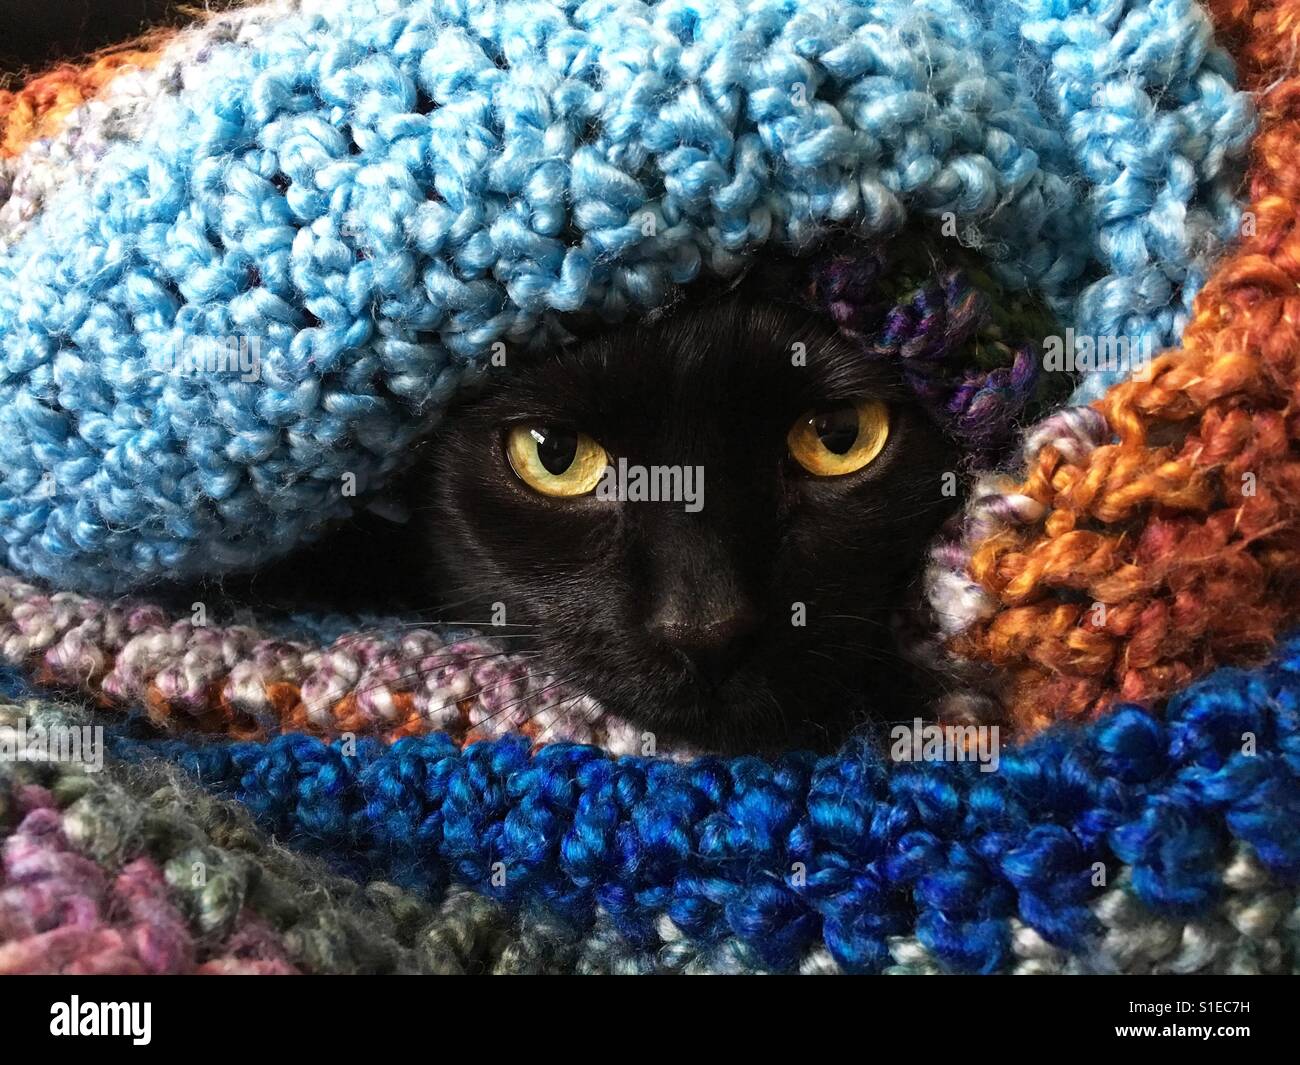 Black cat burrowed in a blanket Stock Photo